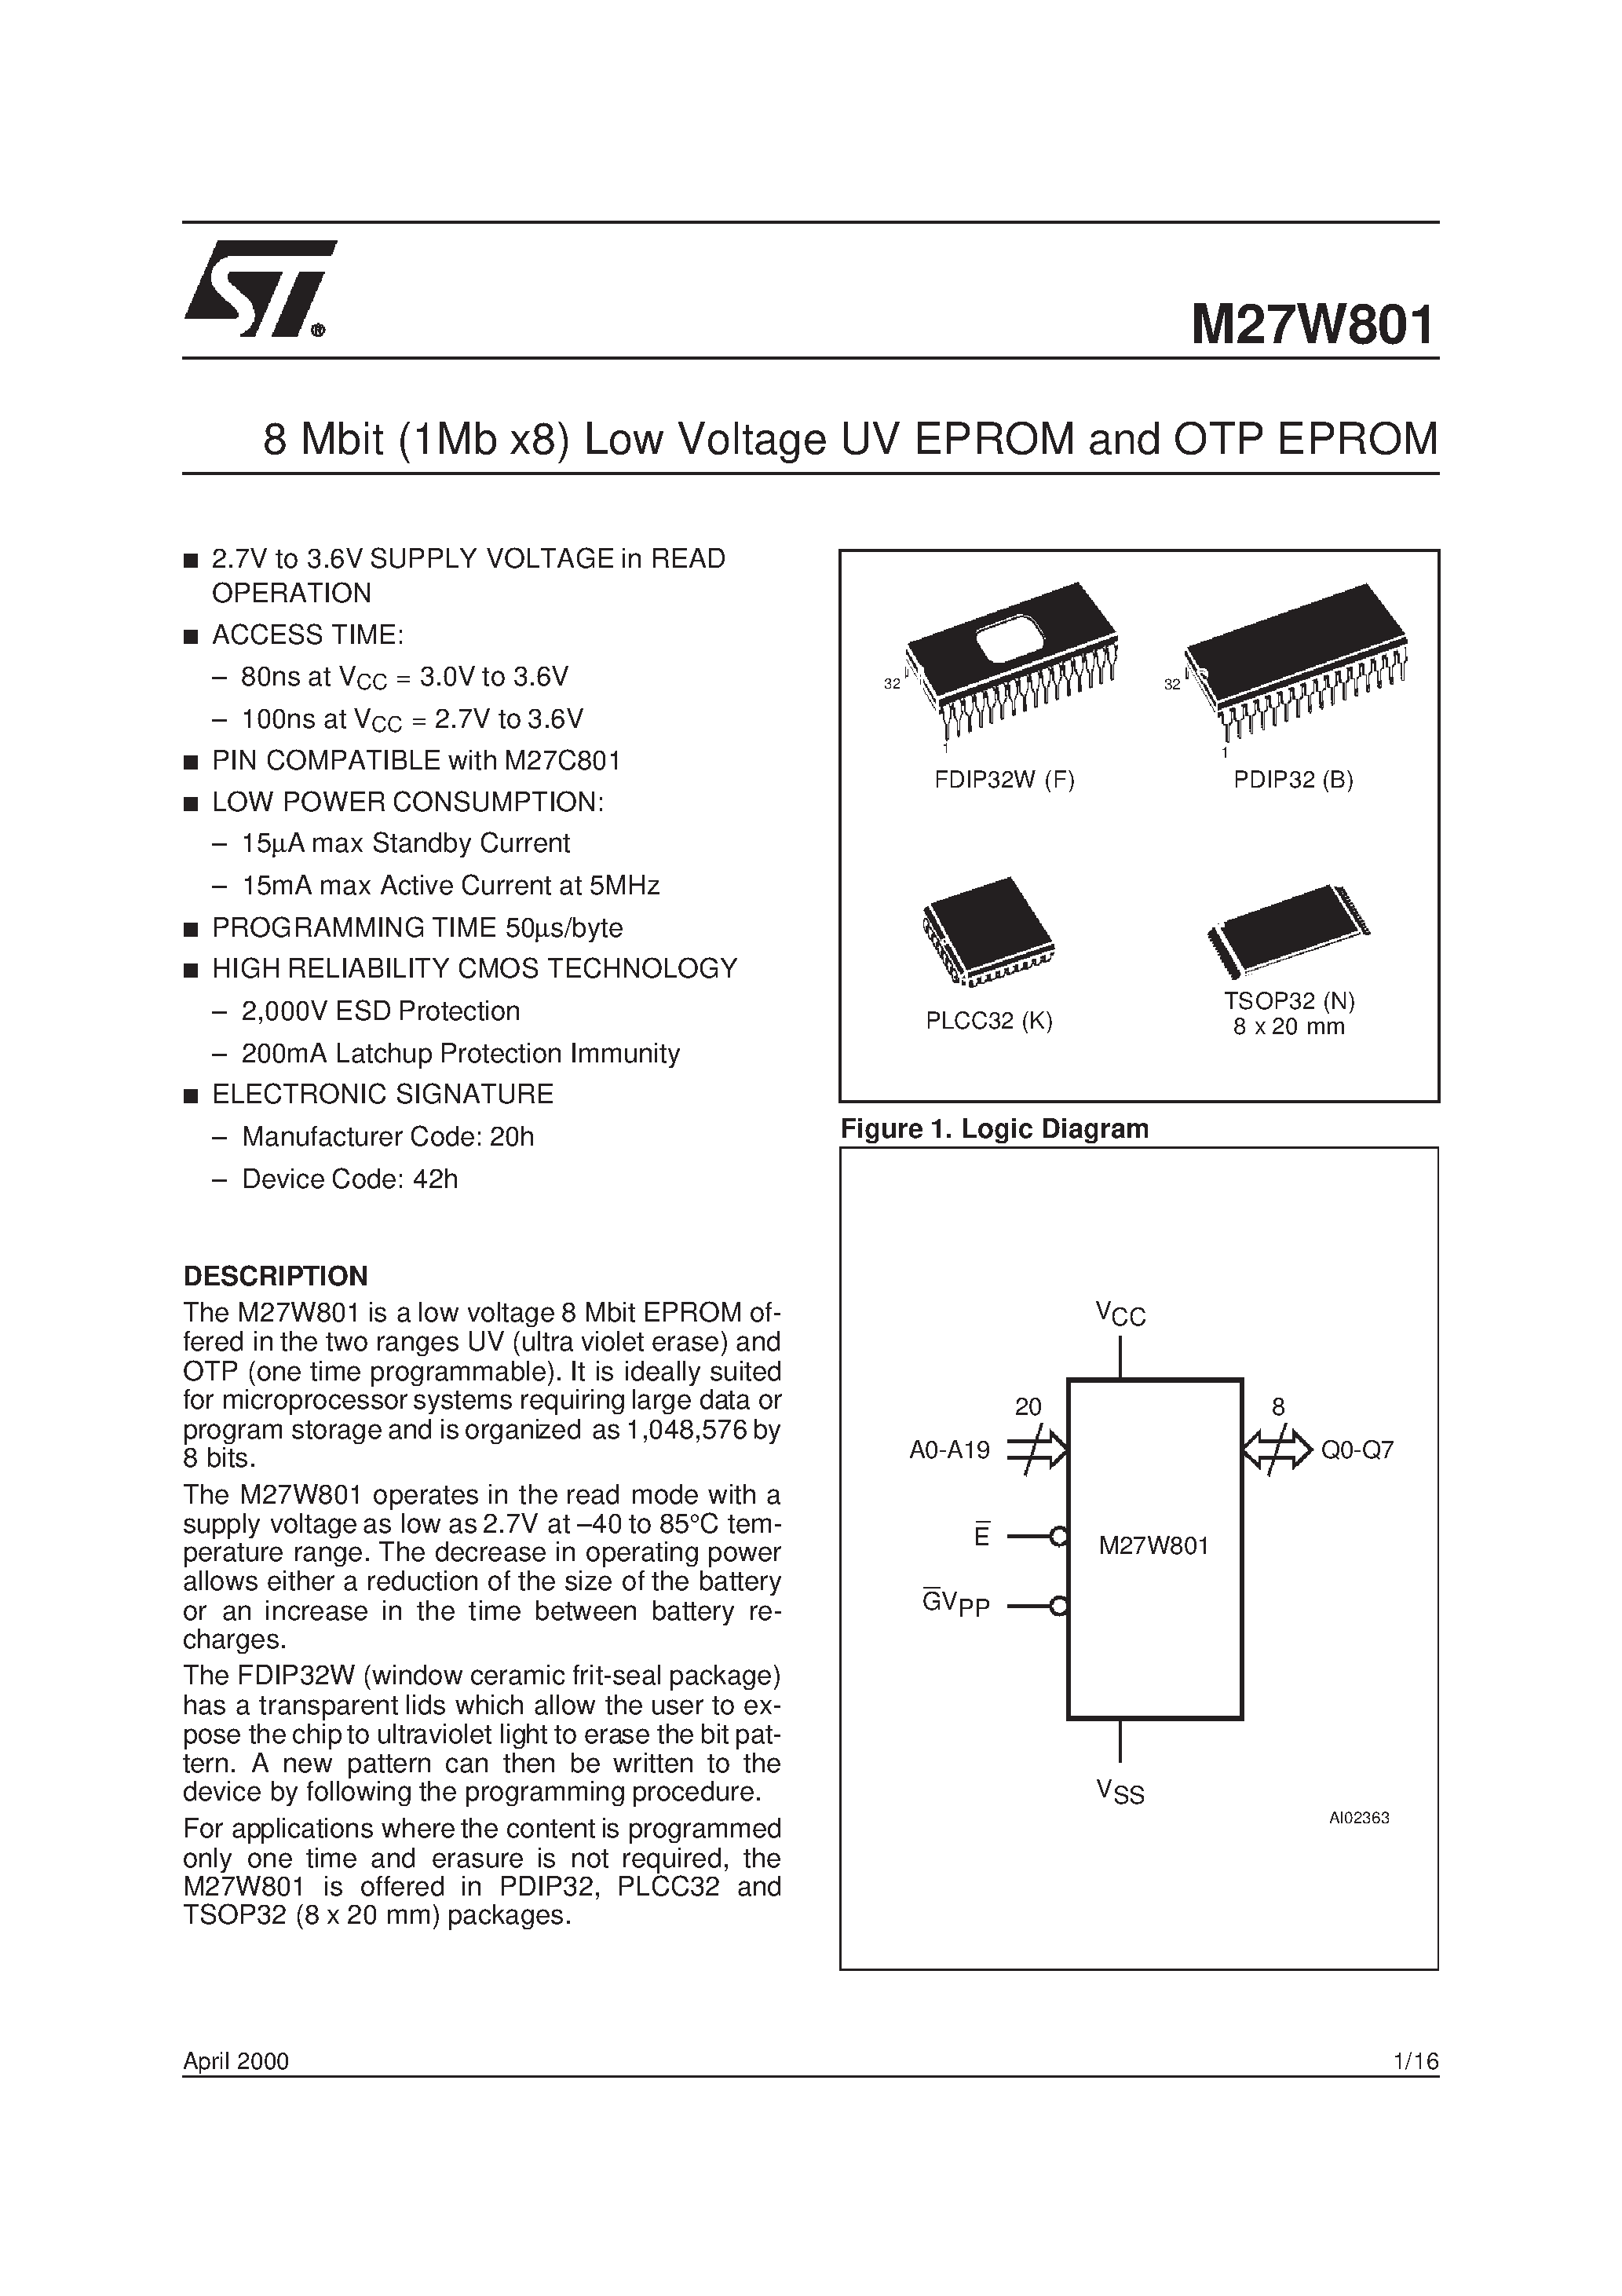 Datasheet M27W801 - 8 Mbit 1Mb x8 Low Voltage UV EPROM and OTP EPROM page 1